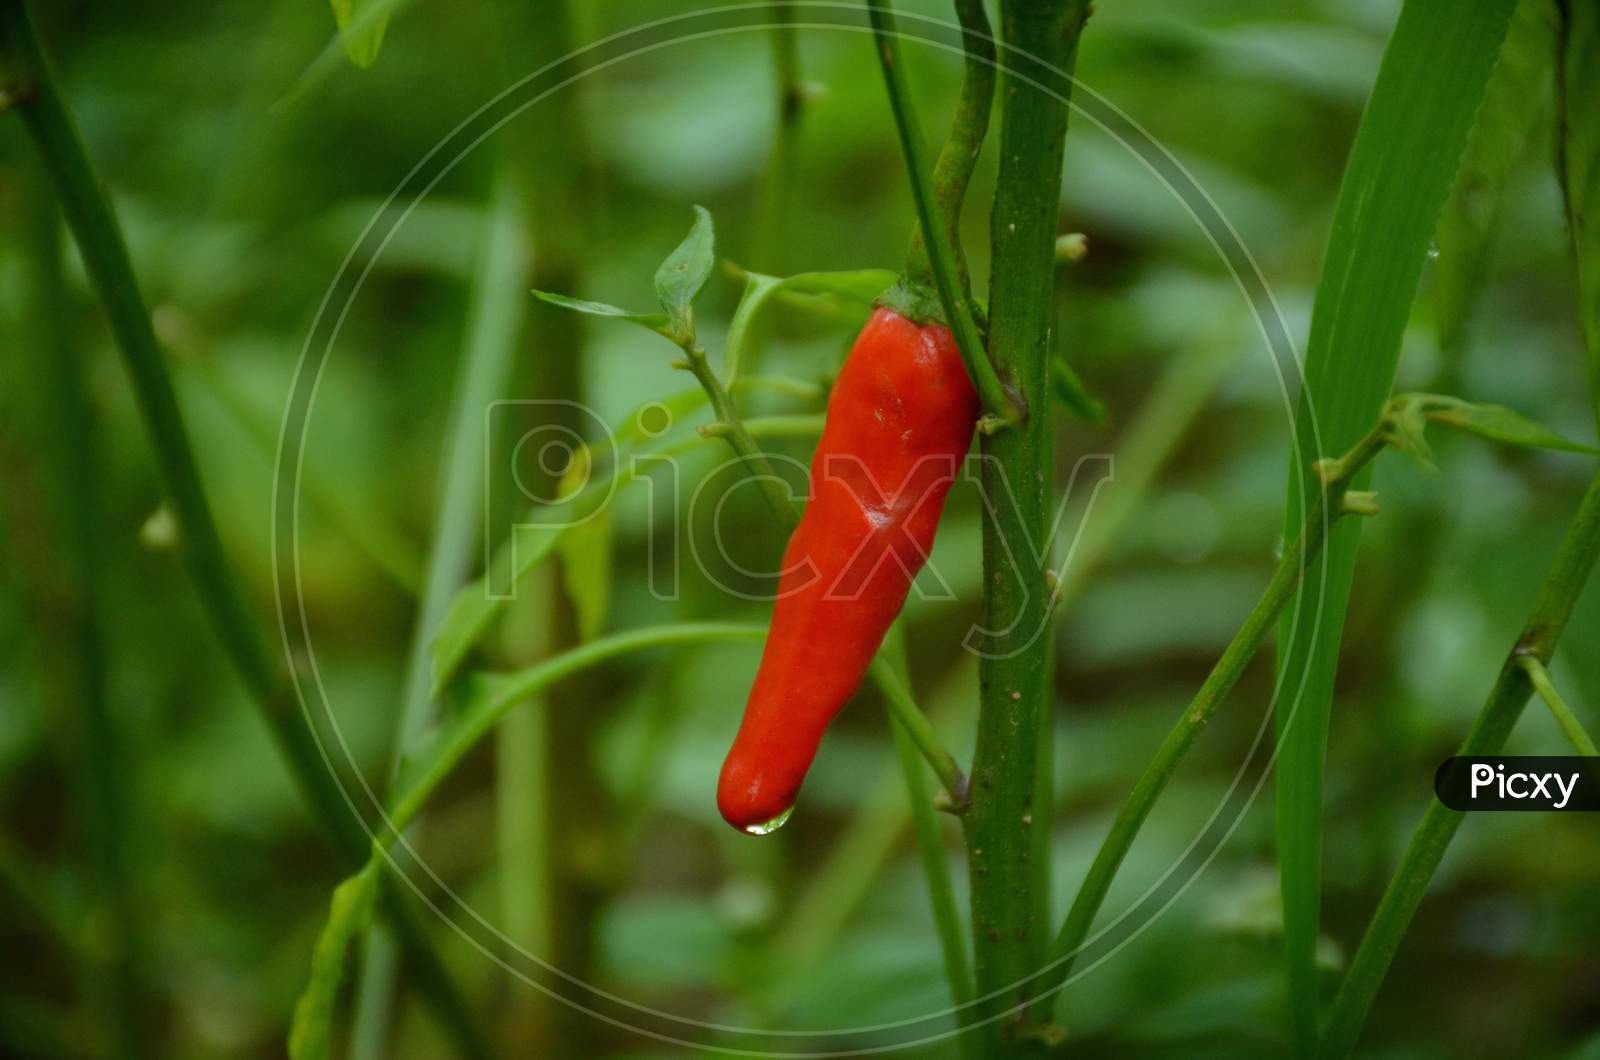 The Red Ripe Chilly With Leaves And Plant In The Garden.